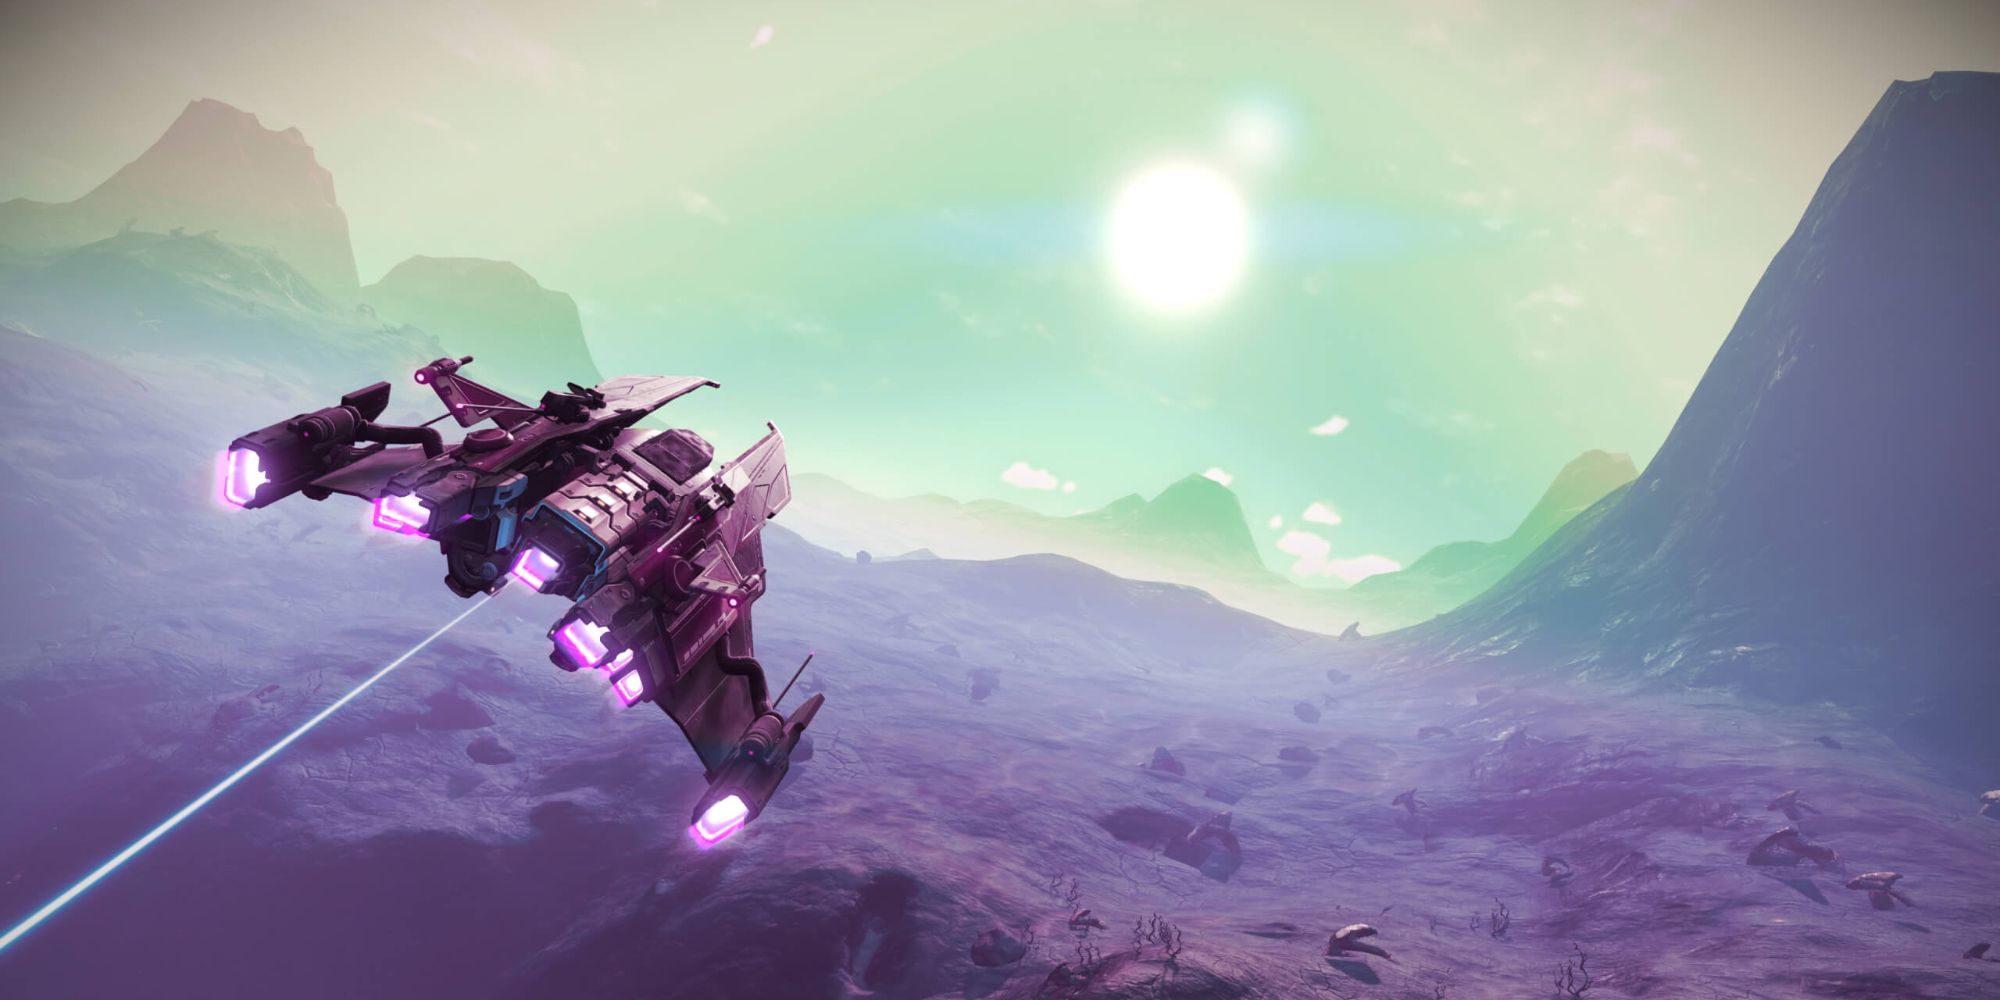 Photo of No Mans Sky's Sentinel ship taking off in an anti-gravity well